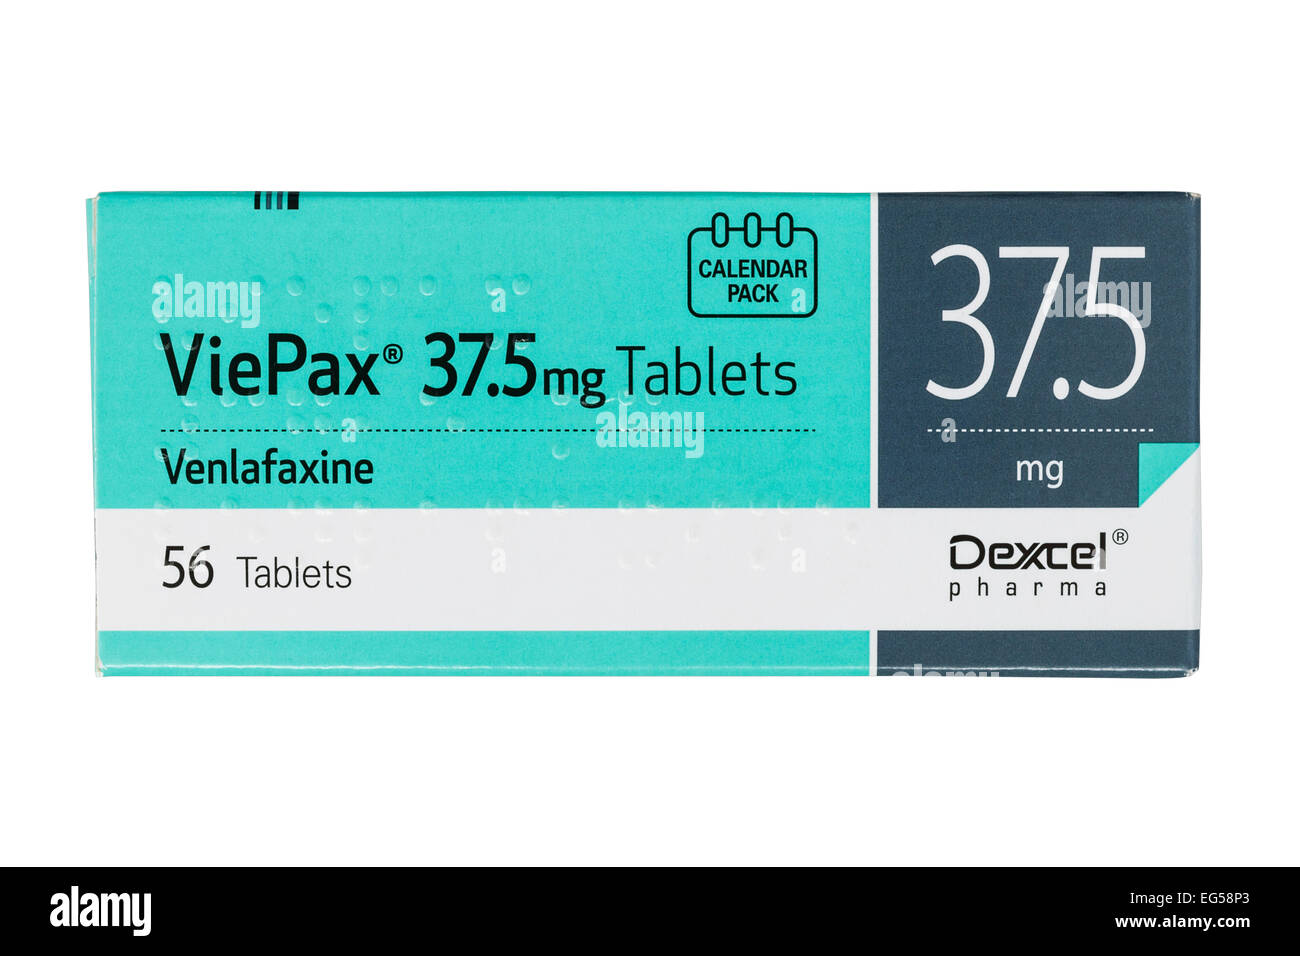 A box of Viepax Venlafaxine 37.5mg tablets on a white background Stock Photo